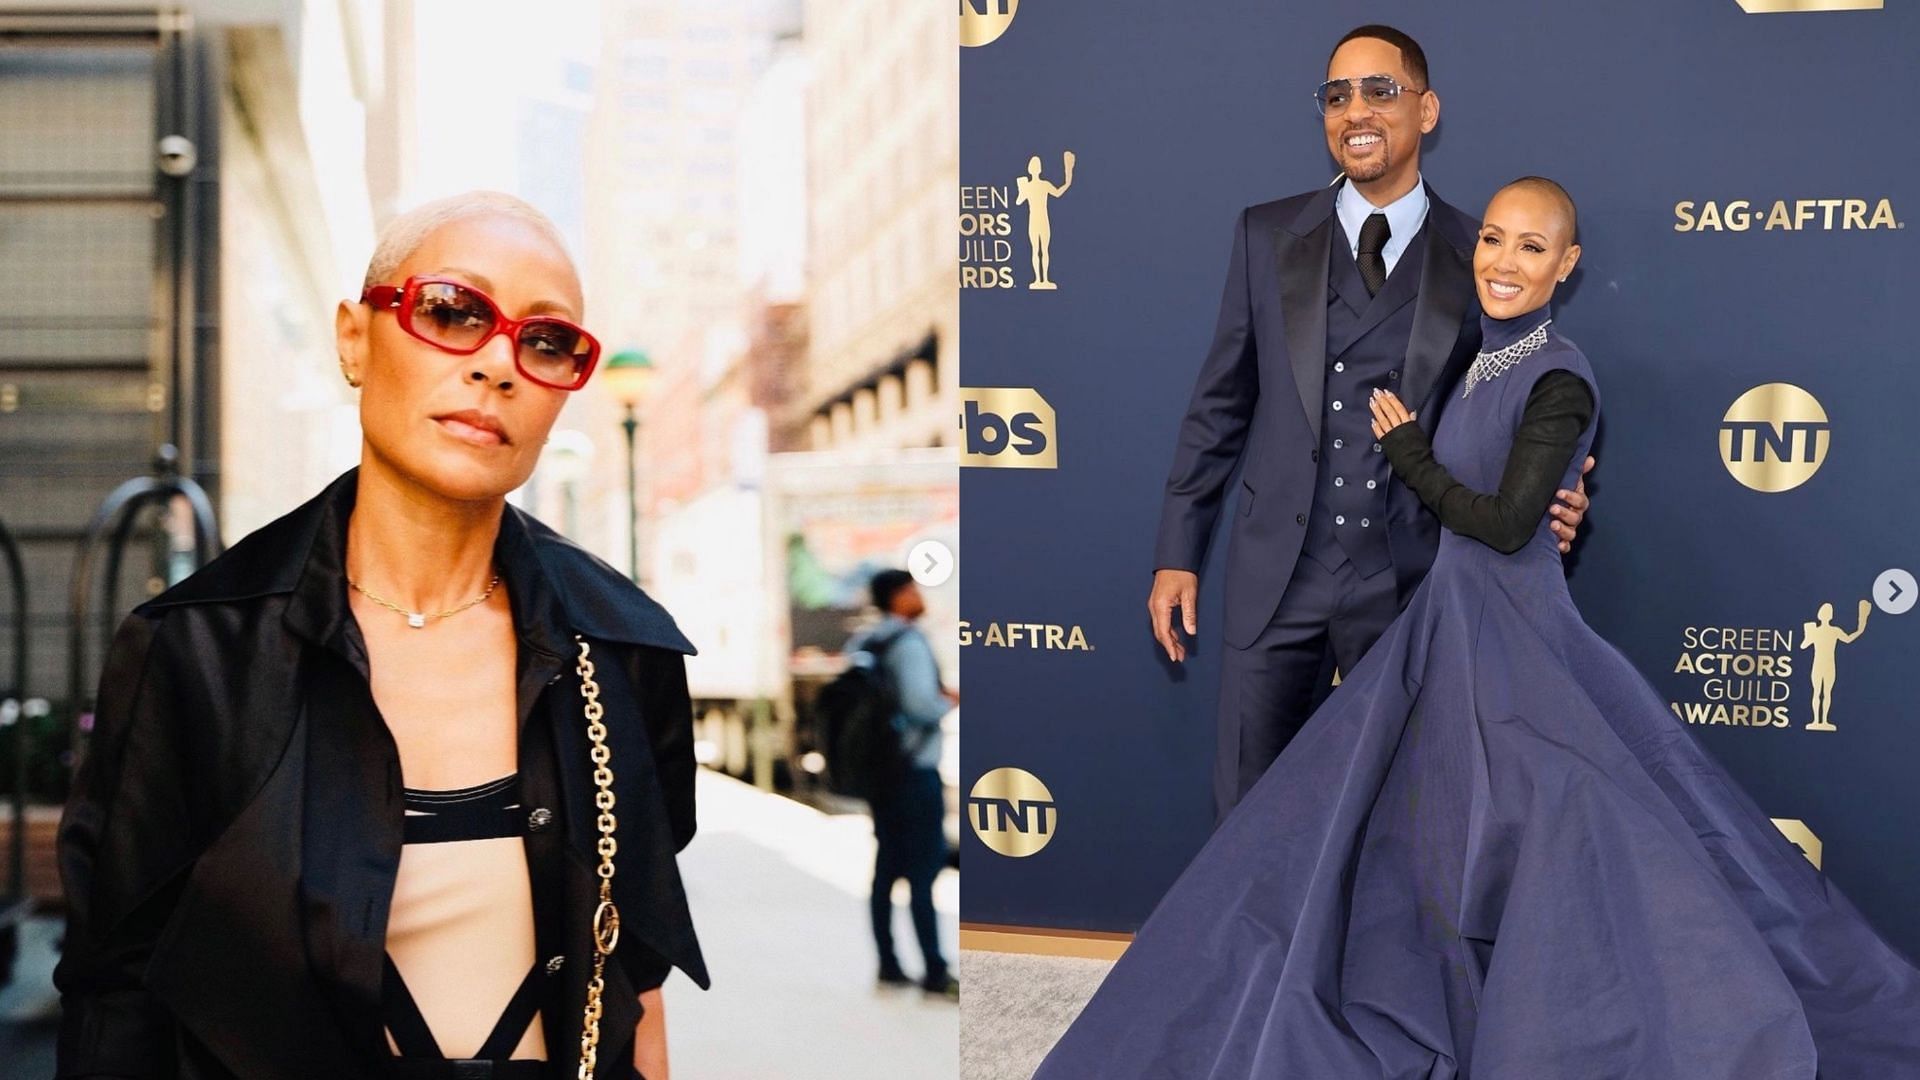 Will Smith and Jada Pinkett Smith's controversial relationship